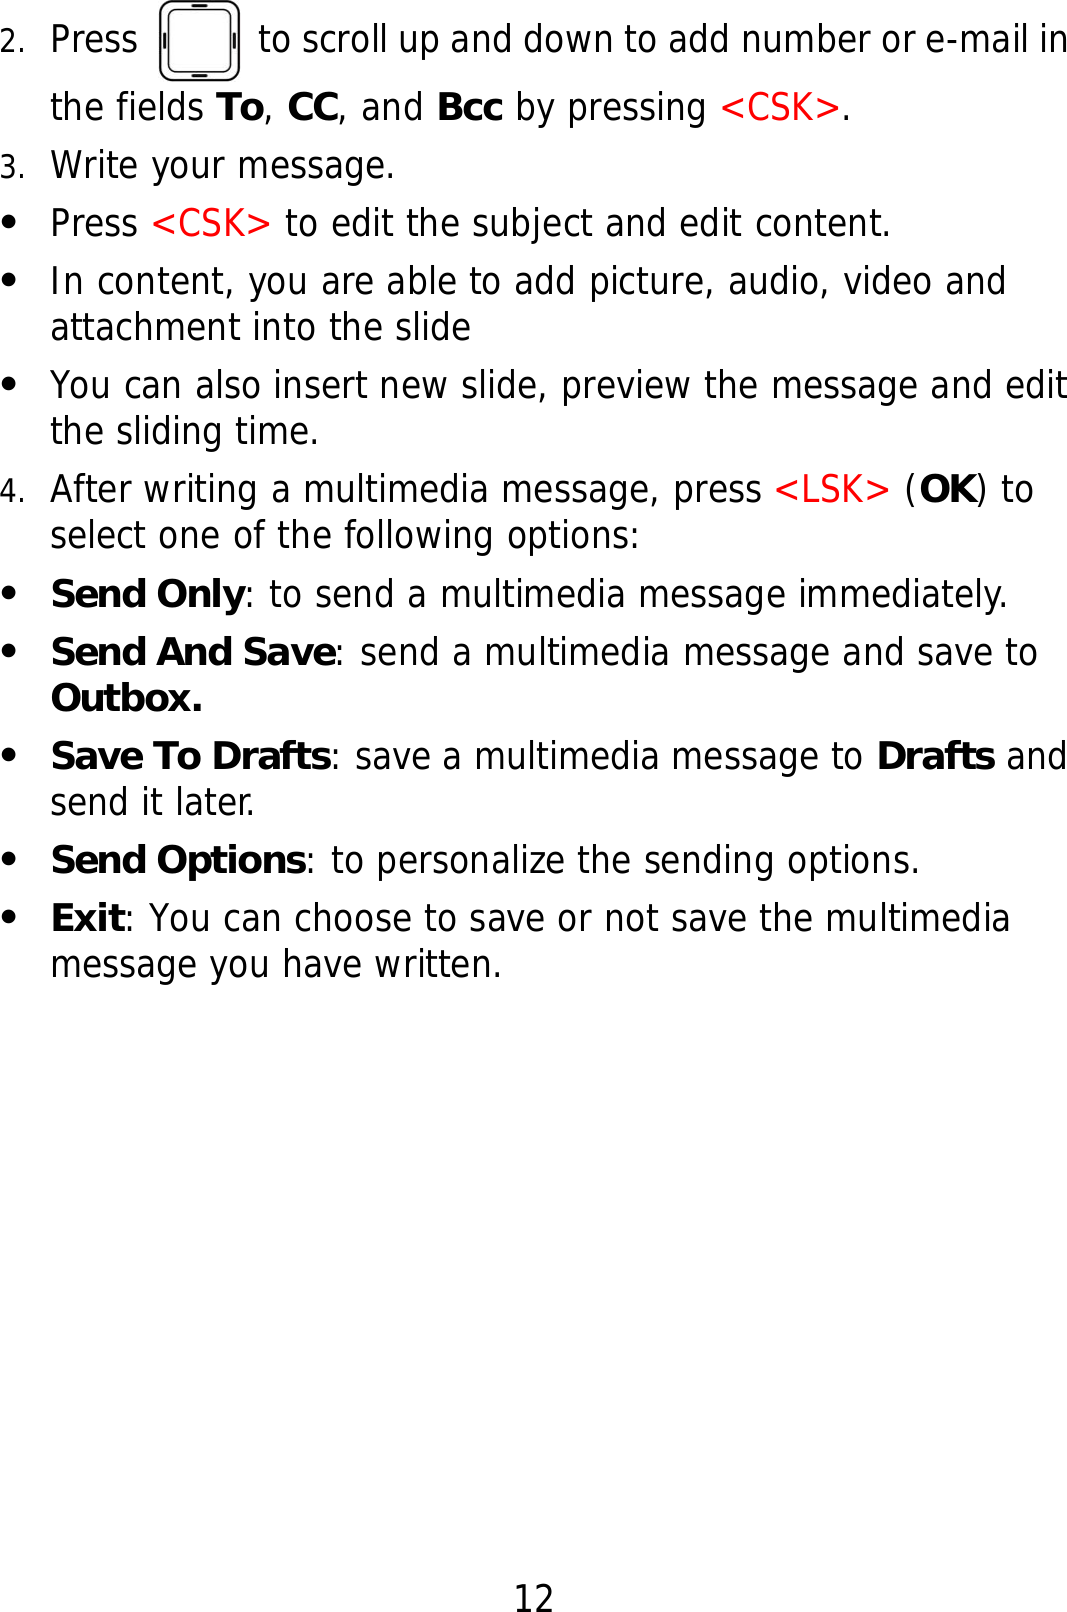 12 2. Press    to scroll up and down to add number or e-mail in the fields To, CC, and Bcc by pressing &lt;CSK&gt;. 3. Write your message. z Press &lt;CSK&gt; to edit the subject and edit content. z In content, you are able to add picture, audio, video and attachment into the slide z You can also insert new slide, preview the message and edit the sliding time. 4. After writing a multimedia message, press &lt;LSK&gt; (OK) to select one of the following options: z Send Only: to send a multimedia message immediately. z Send And Save: send a multimedia message and save to Outbox. z Save To Drafts: save a multimedia message to Drafts and send it later. z Send Options: to personalize the sending options. z Exit: You can choose to save or not save the multimedia message you have written.   